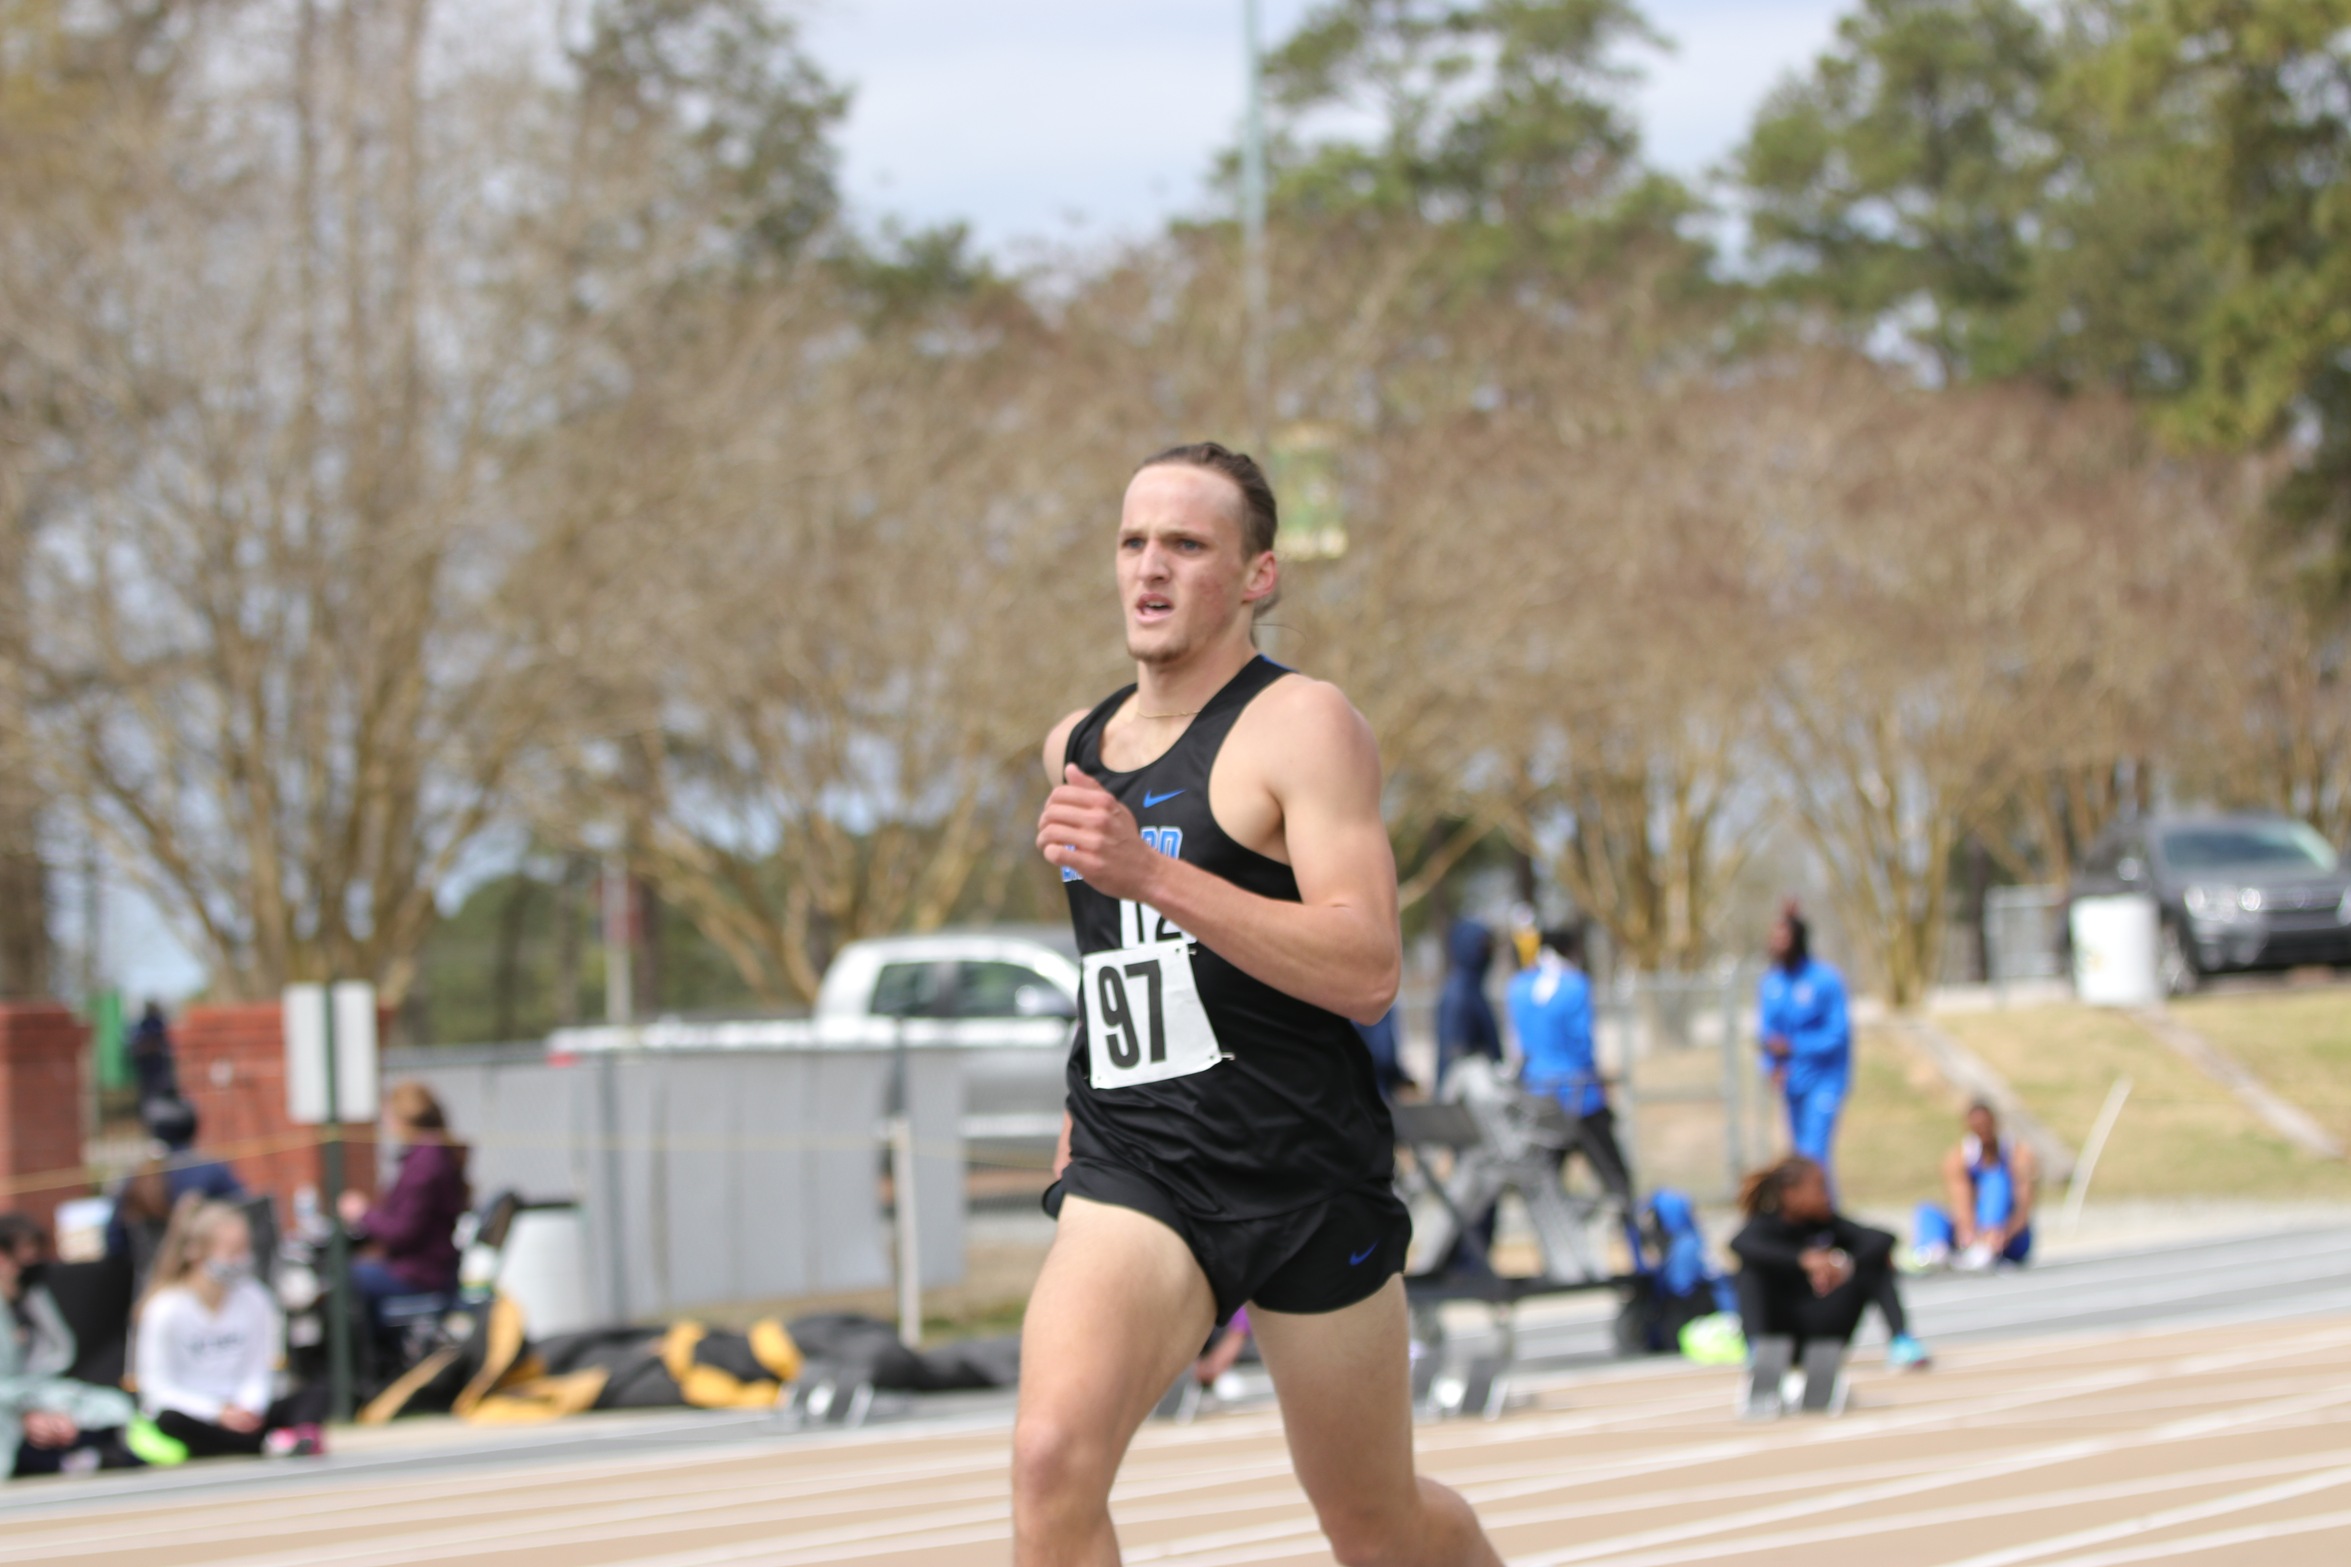 George Wells secured a 15th place finish at the CIU Rams Invitational (Photo courtesy of Kierston Smith, CIU Communications).